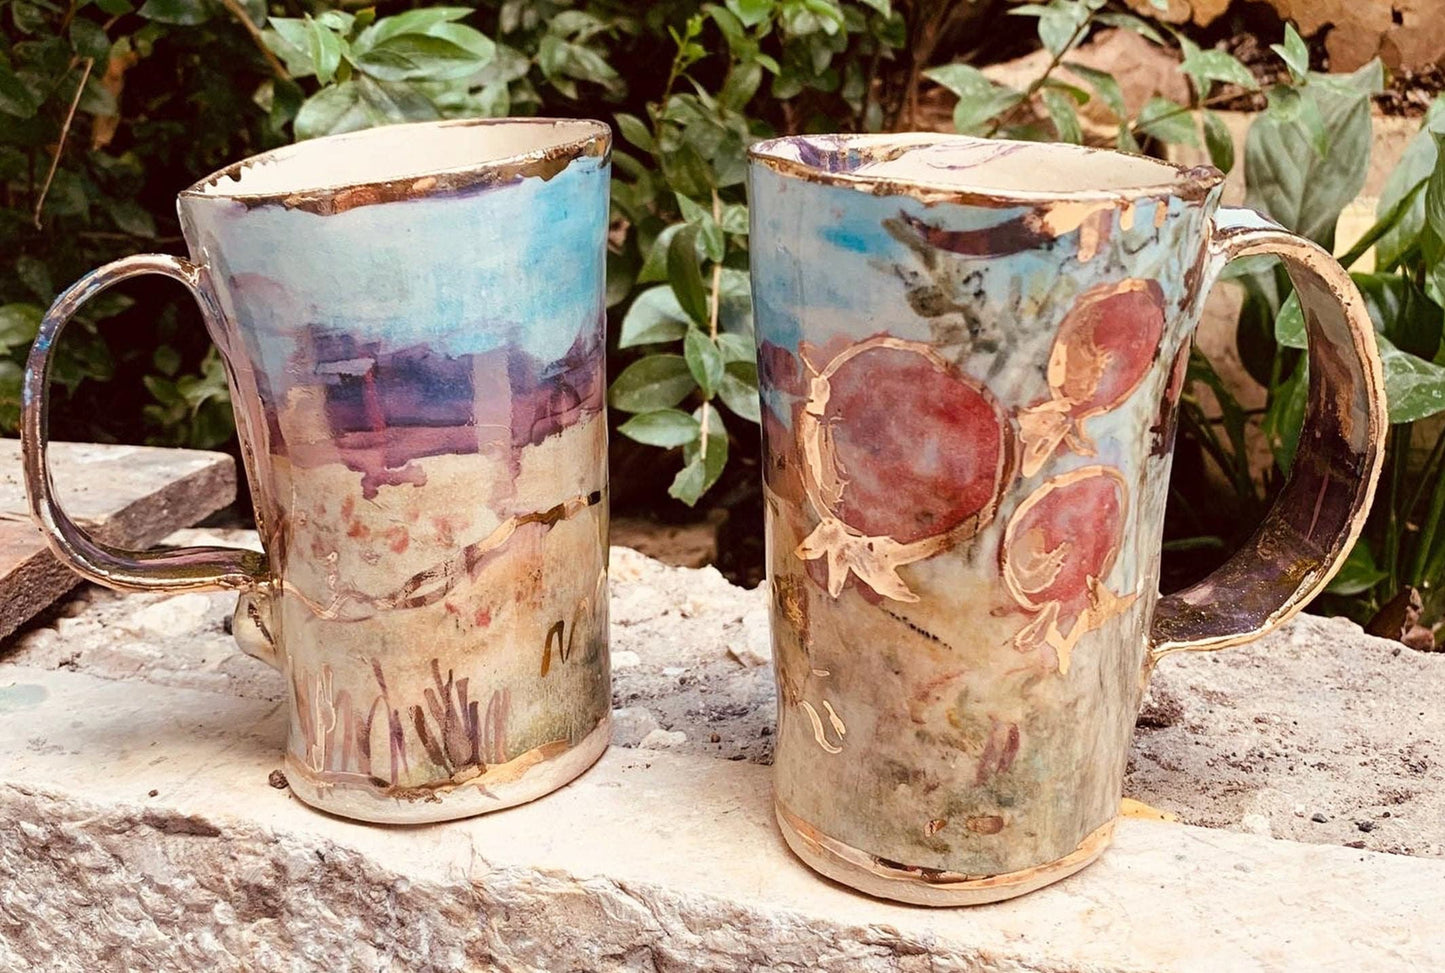 Hand-painted | Ceramic Mugs | Seven Species | Inspired by Israel